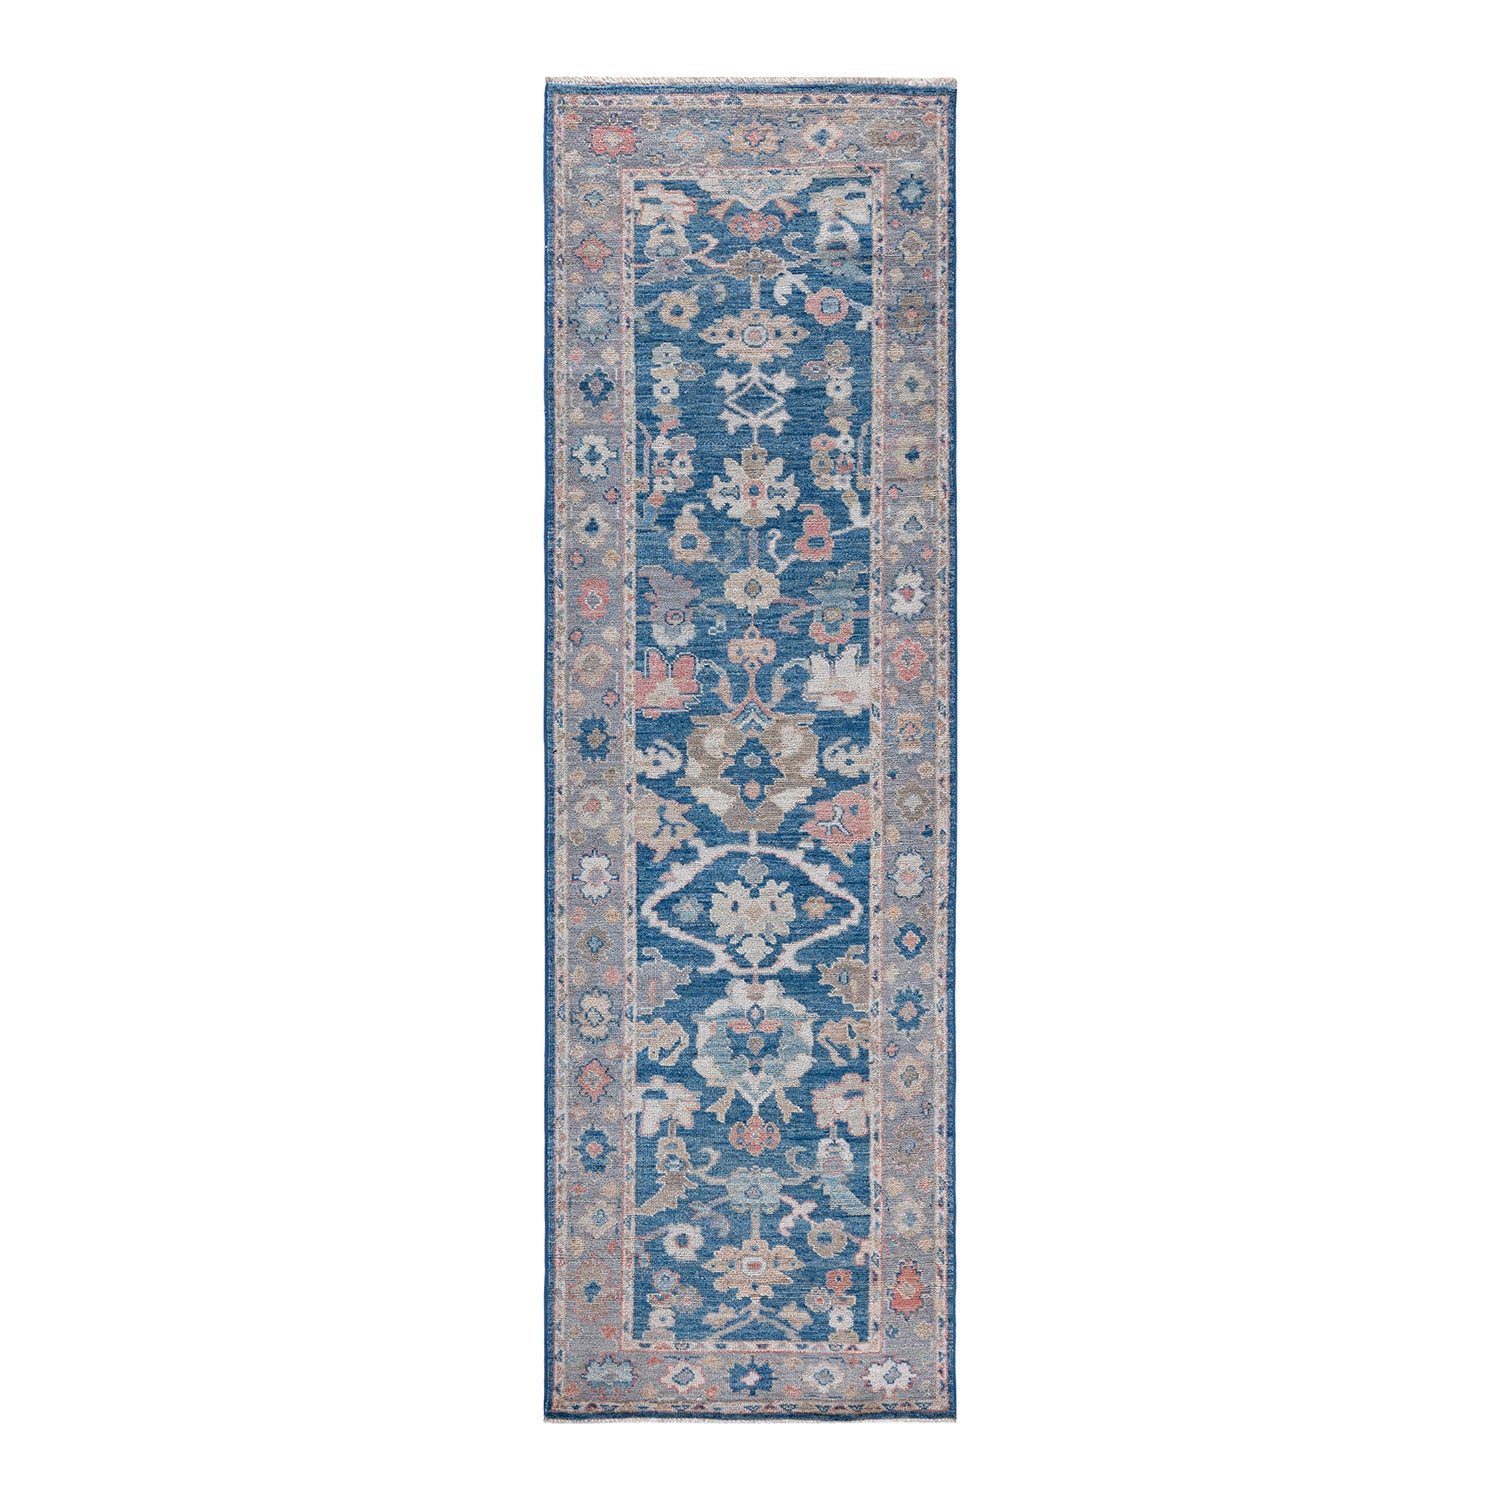 Oushak, One-of-a-Kind Hand-Knotted Runner Rug - Light Blue, 2' 11" x 9' 8" Default Title